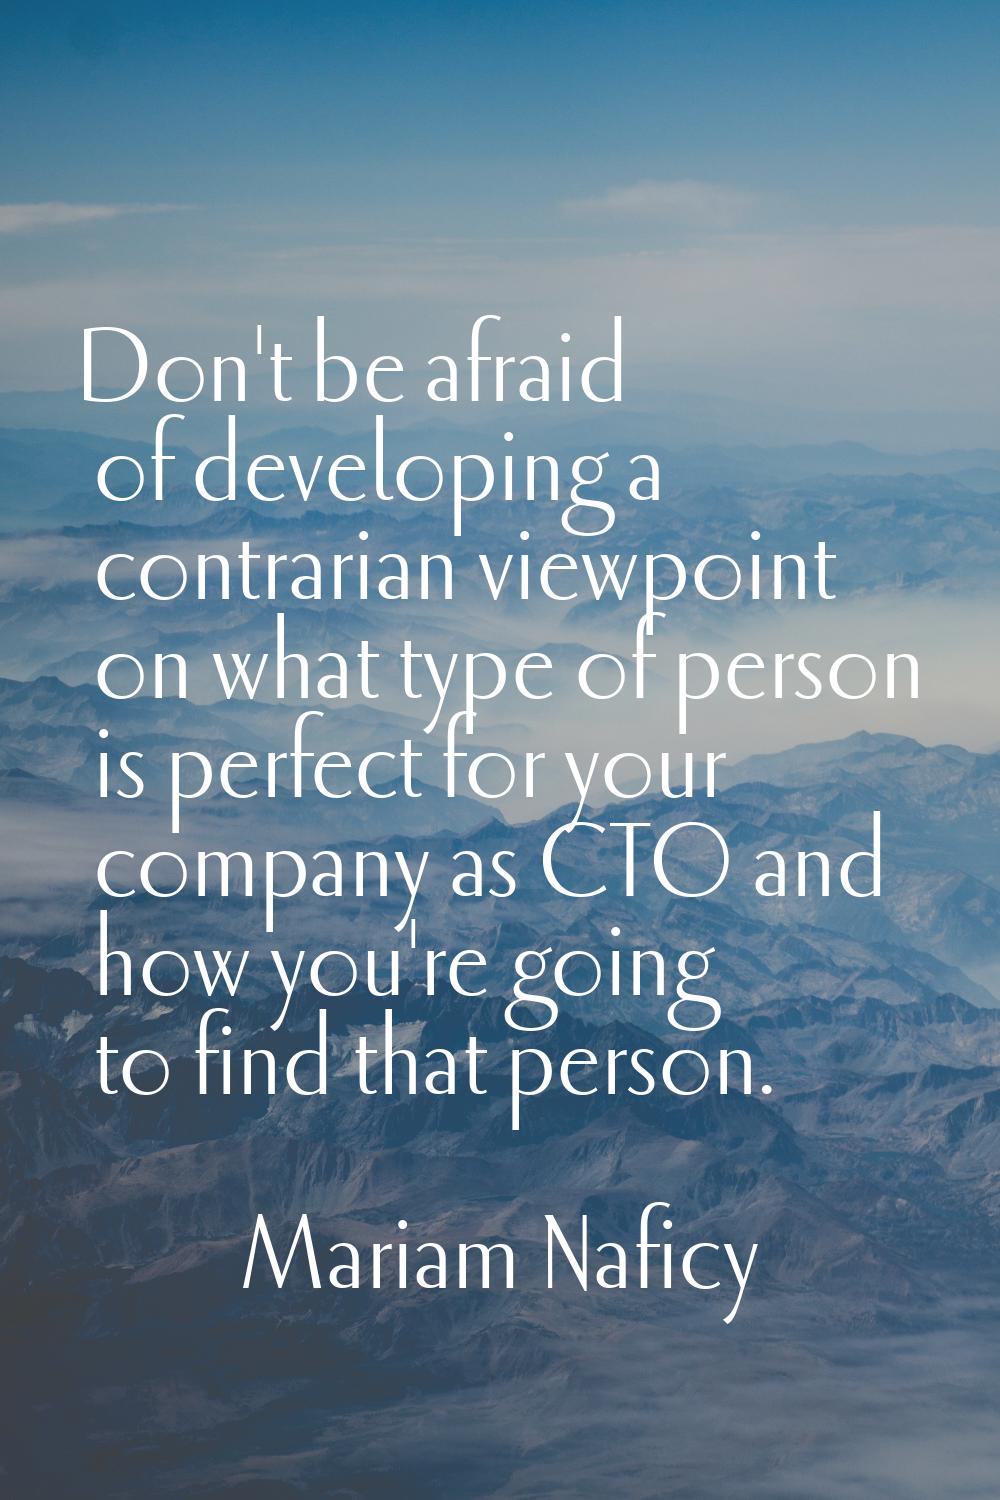 Don't be afraid of developing a contrarian viewpoint on what type of person is perfect for your com